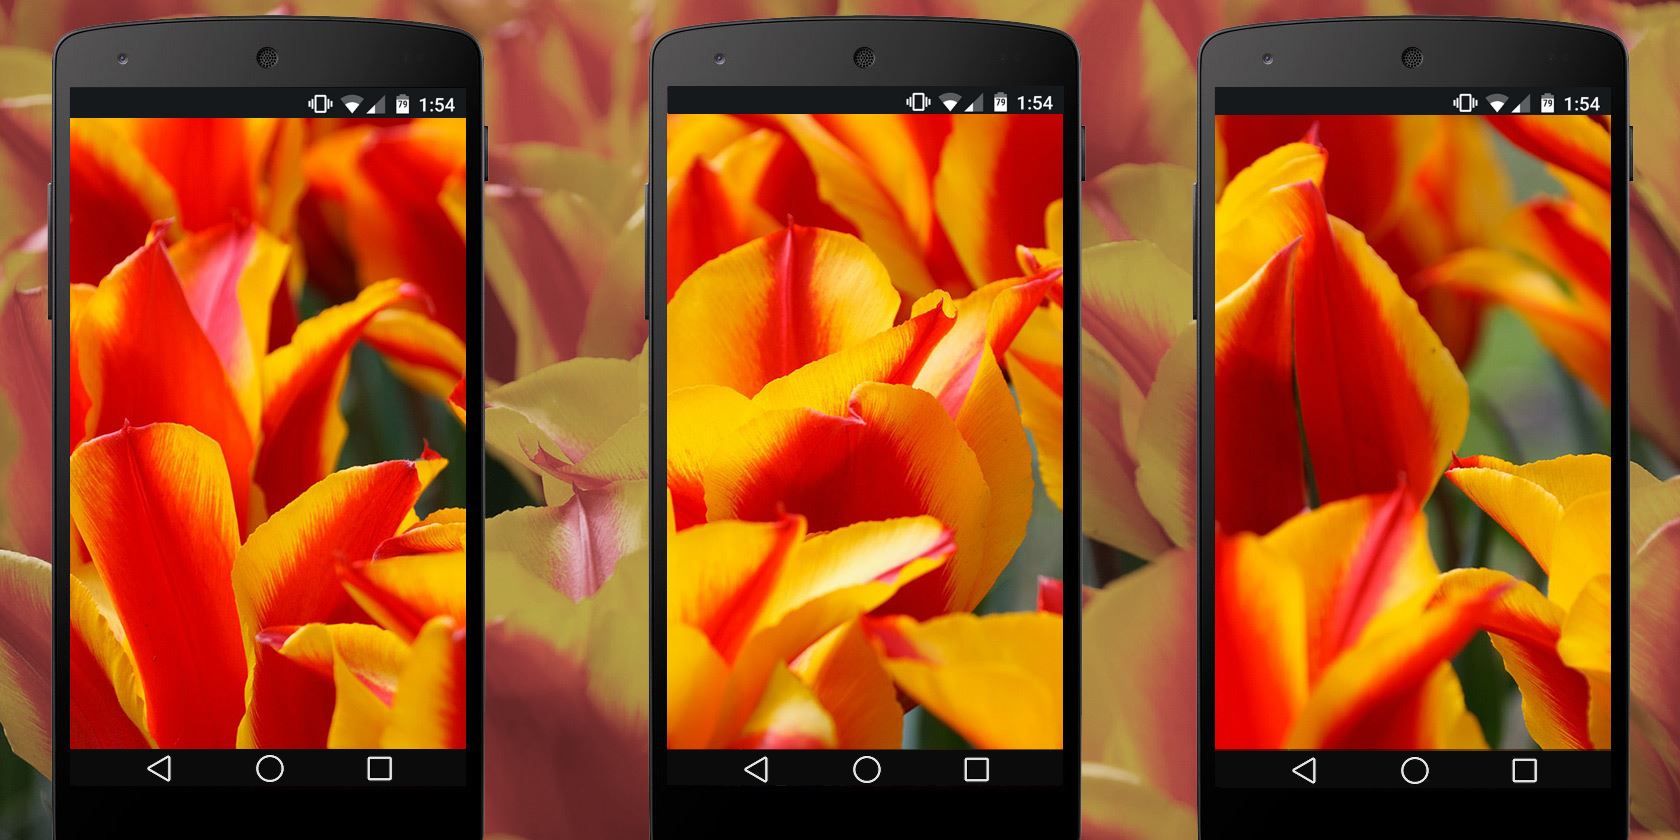 How to Make Your Own Custom Wallpaper for Android